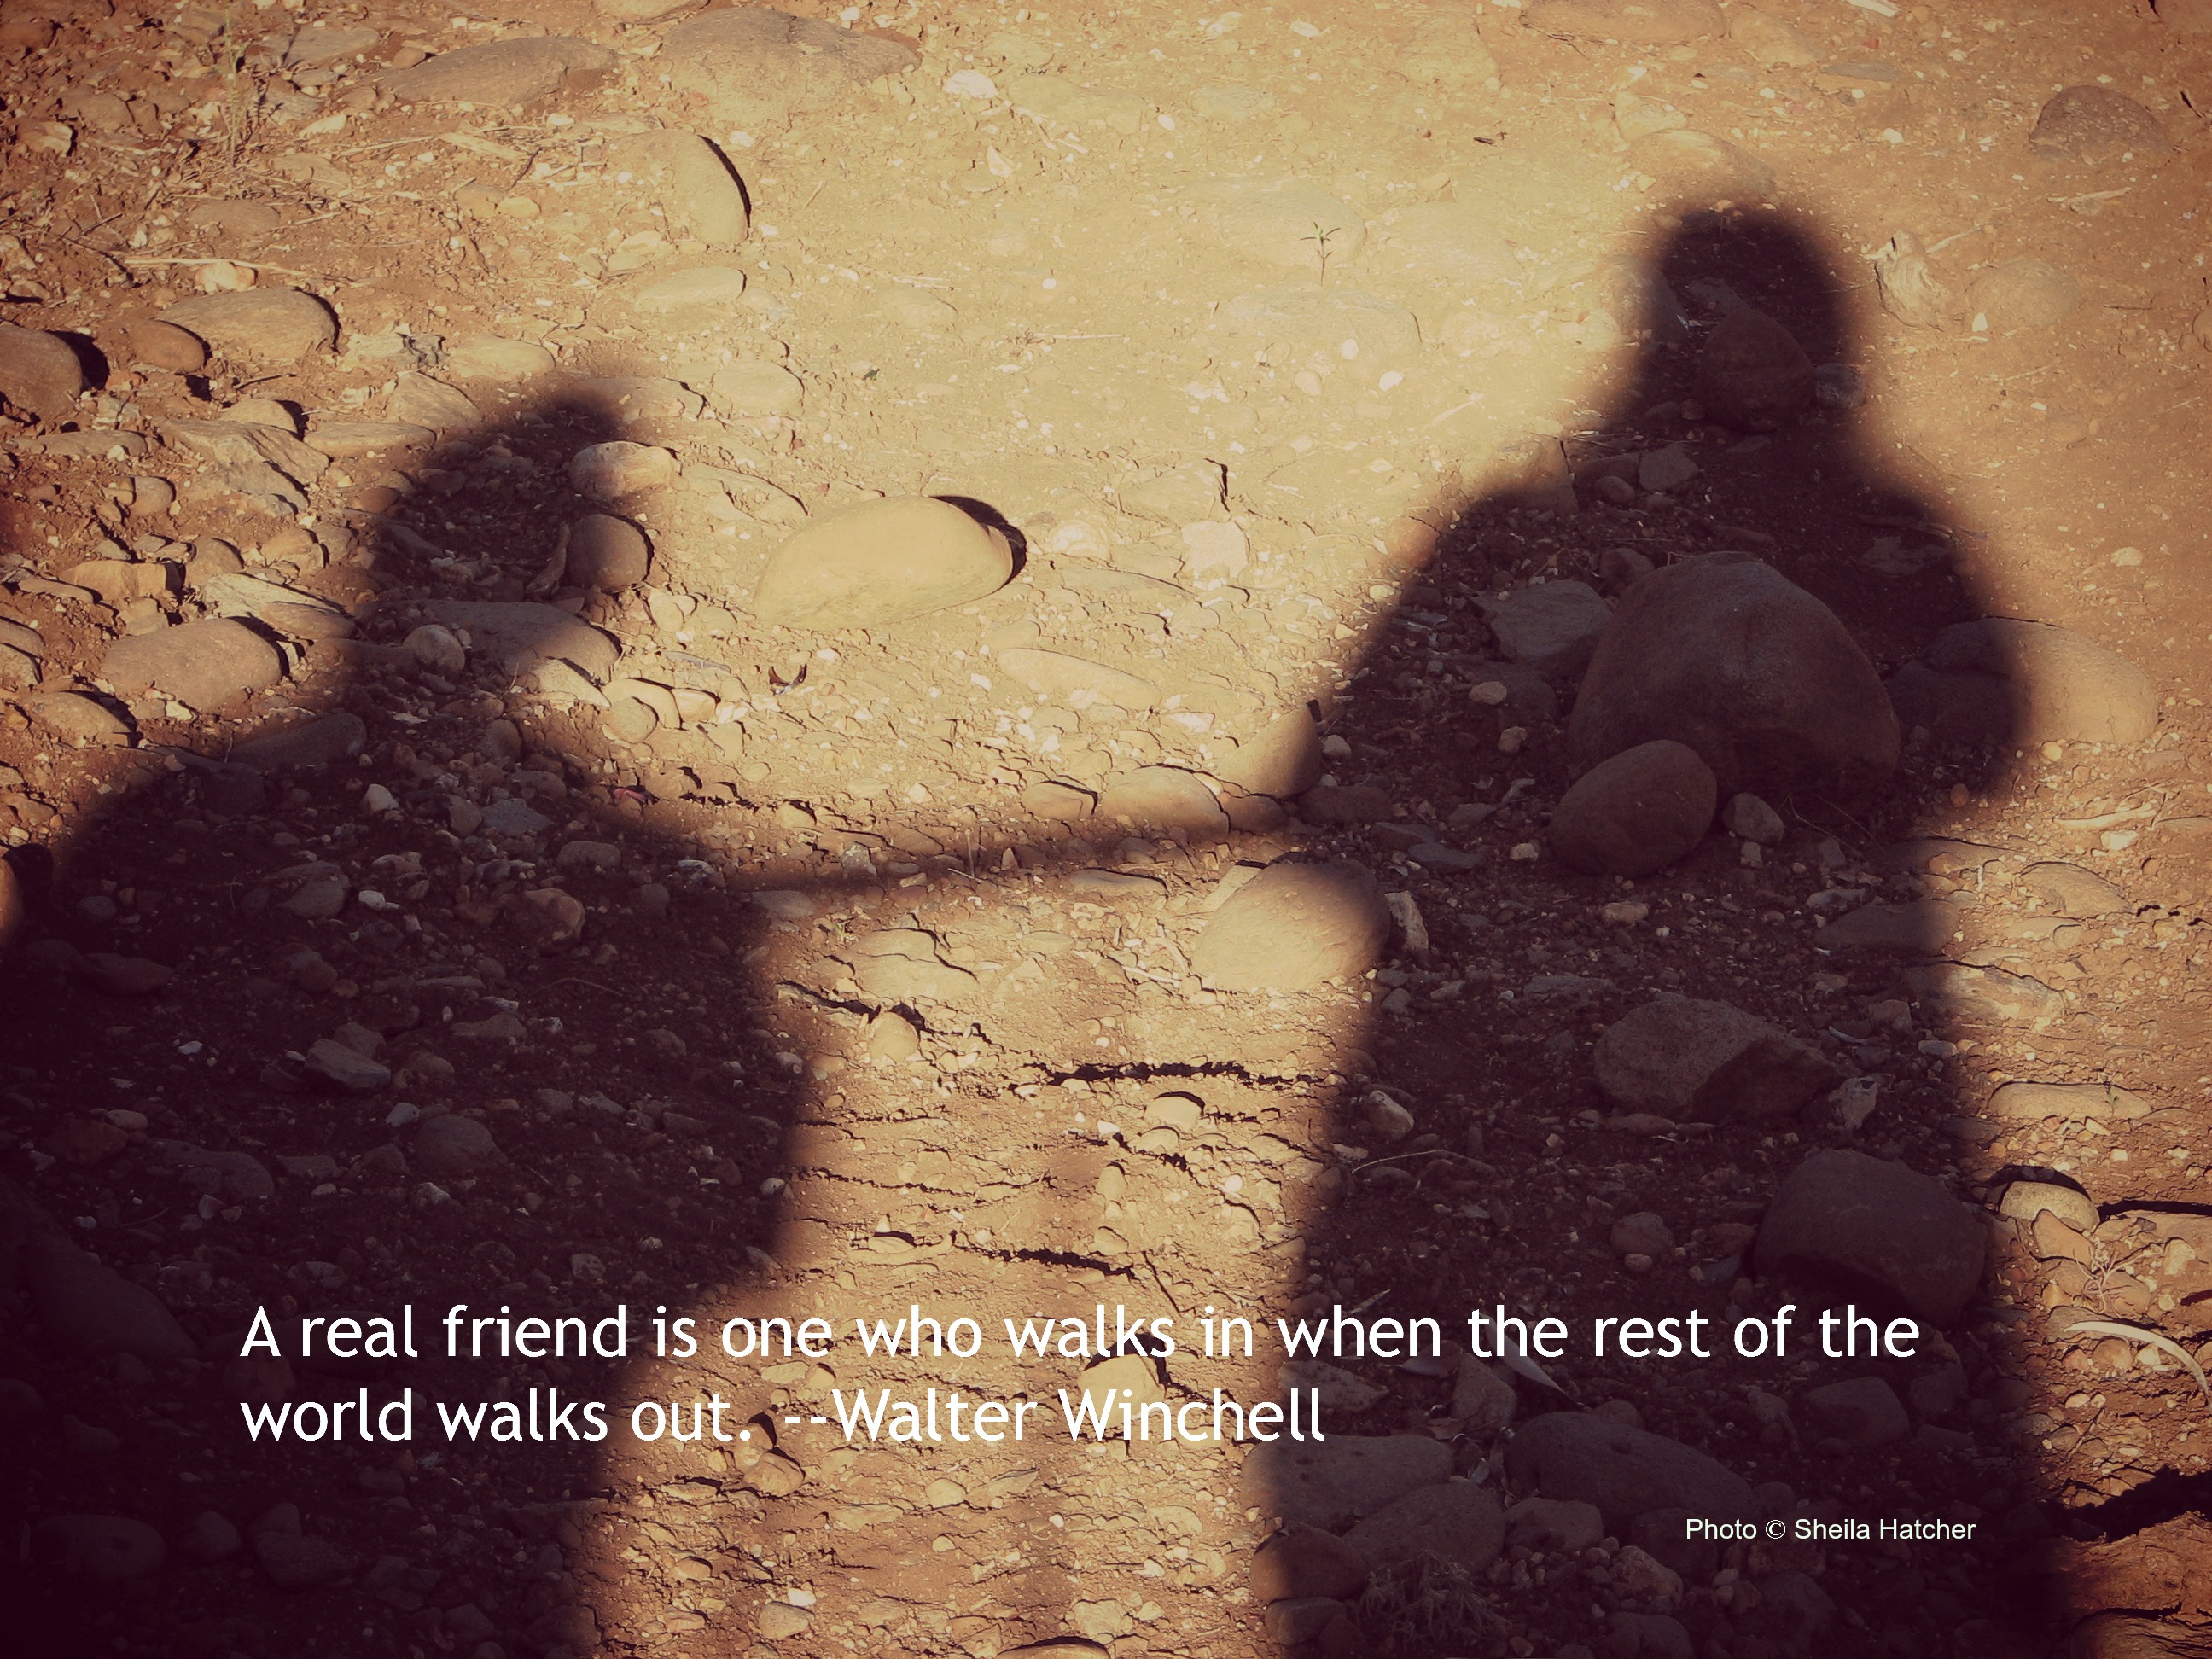 A Real Friend Is One Who Walks In When The Rest Of The World Walks Outwalter Winchell 